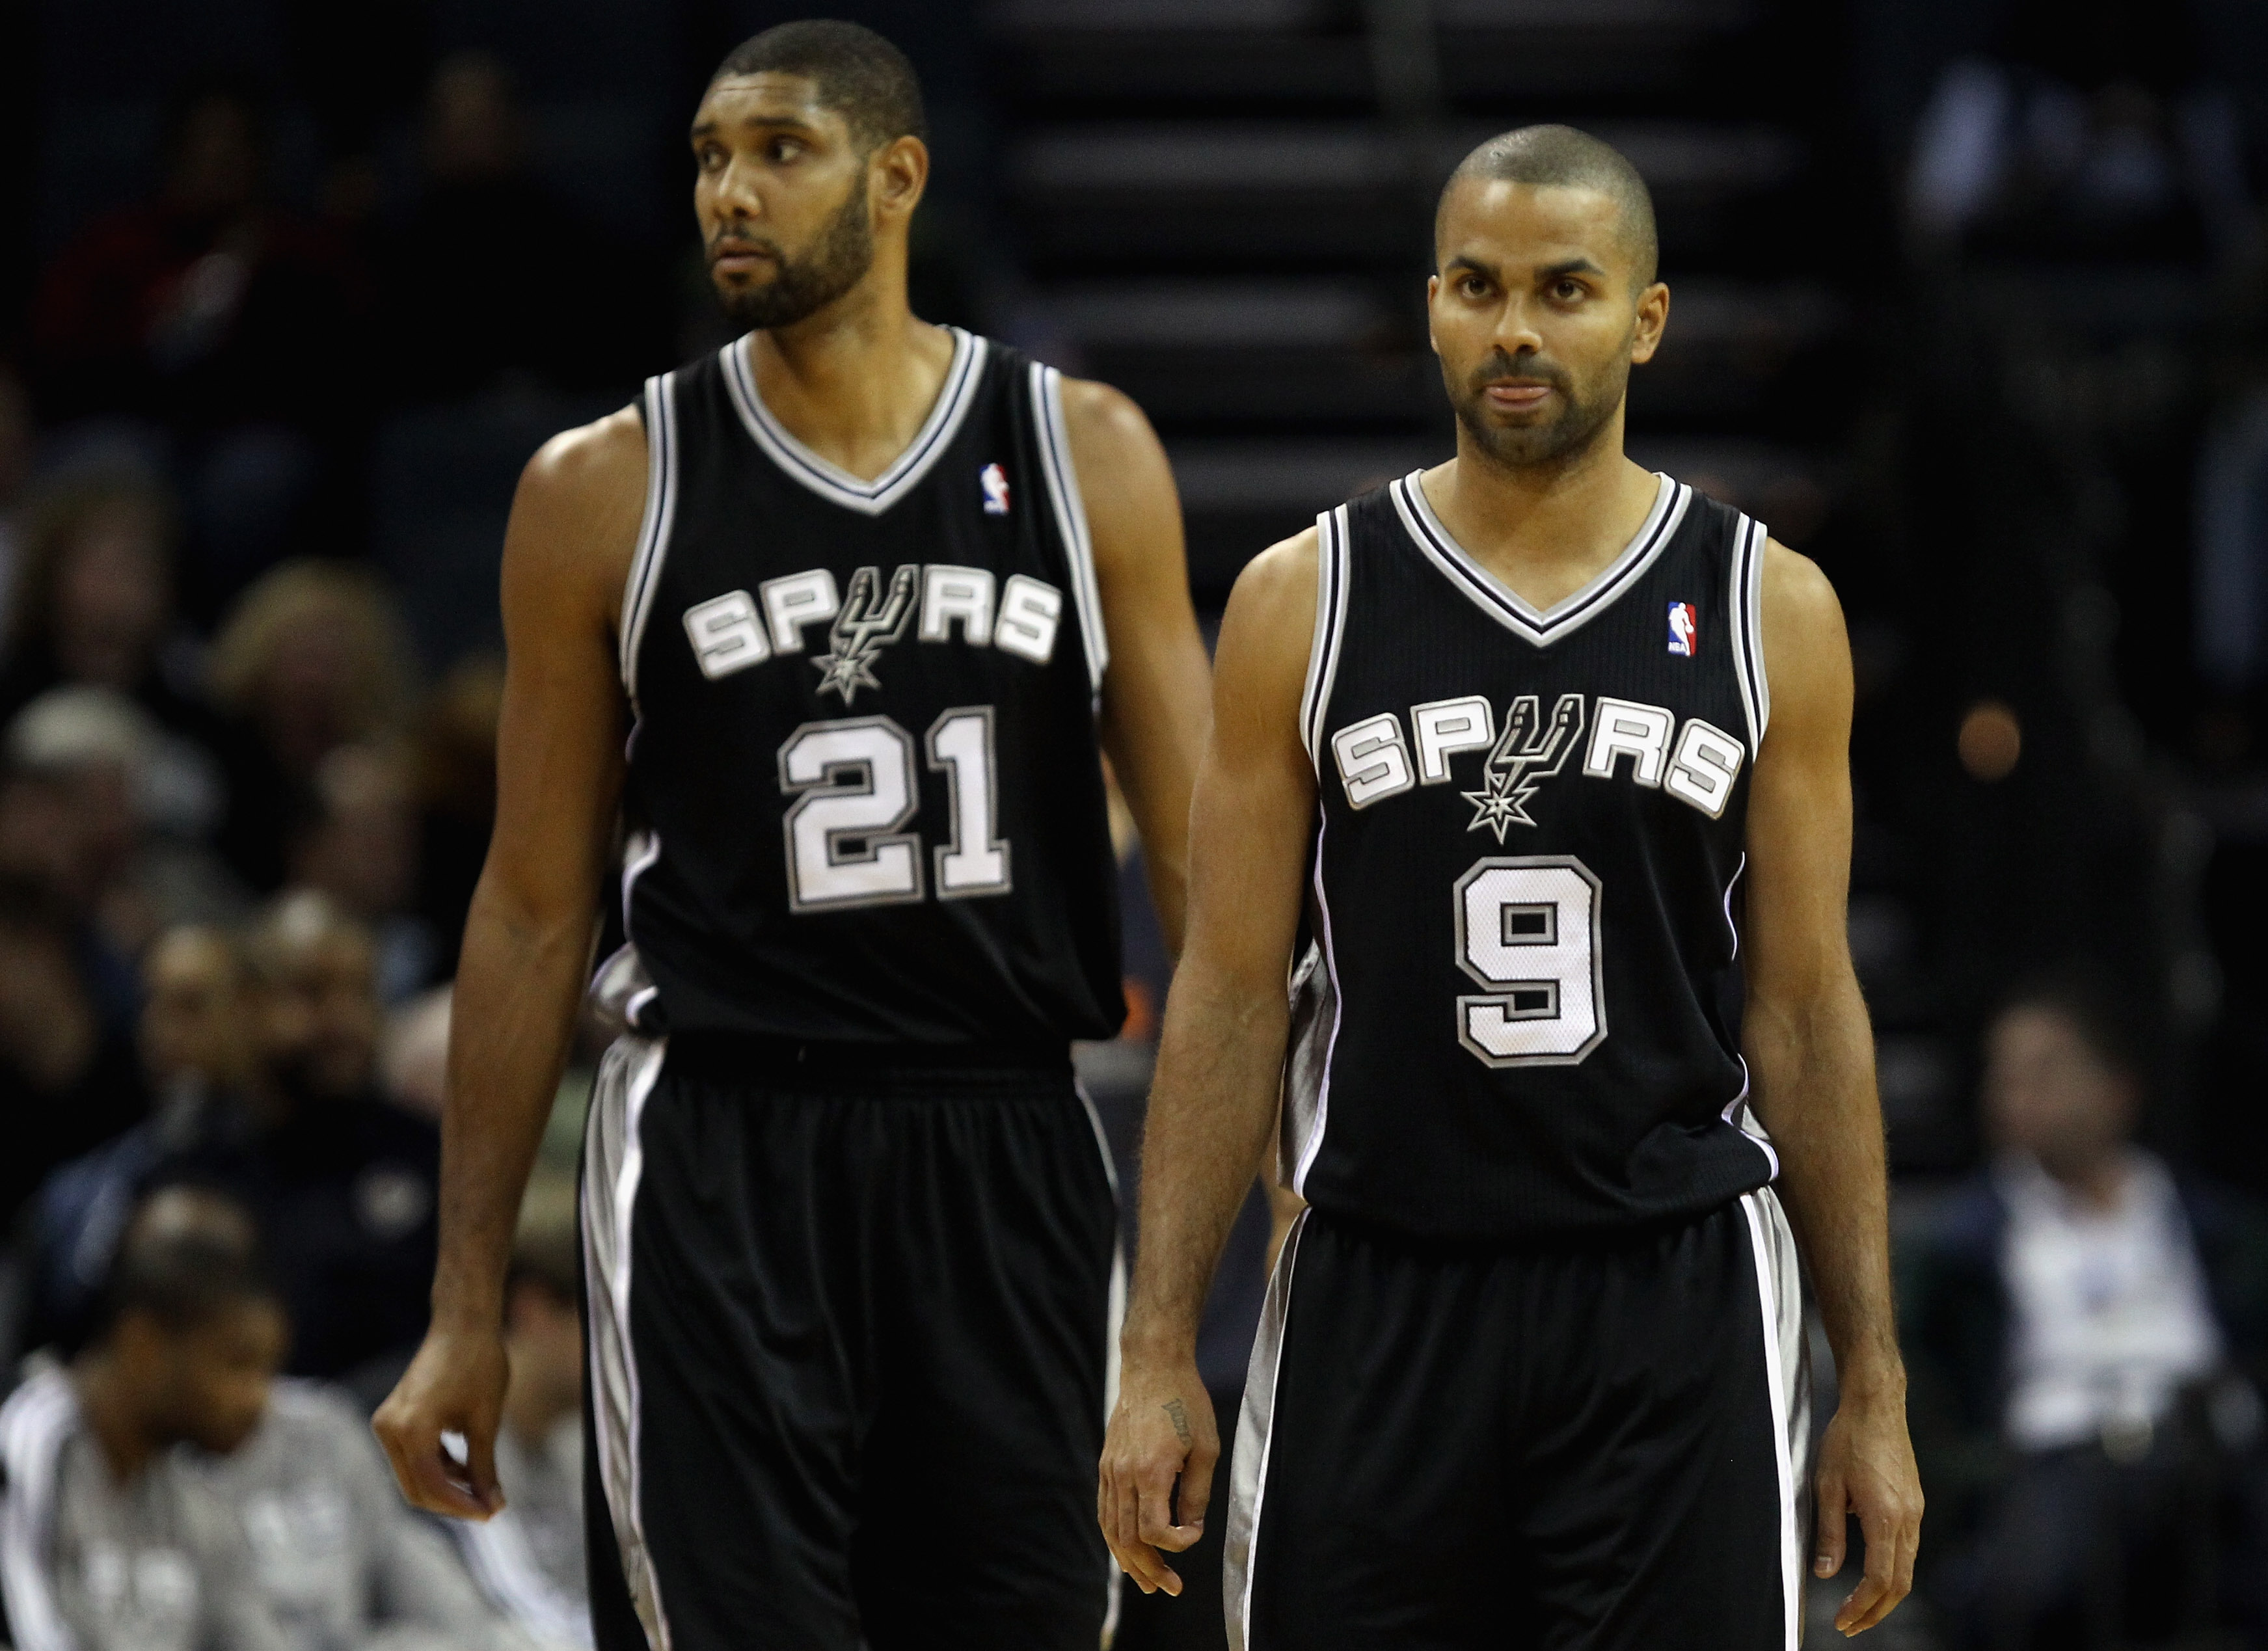 Tim Duncan is stepping away from his full-time coaching role with Spurs